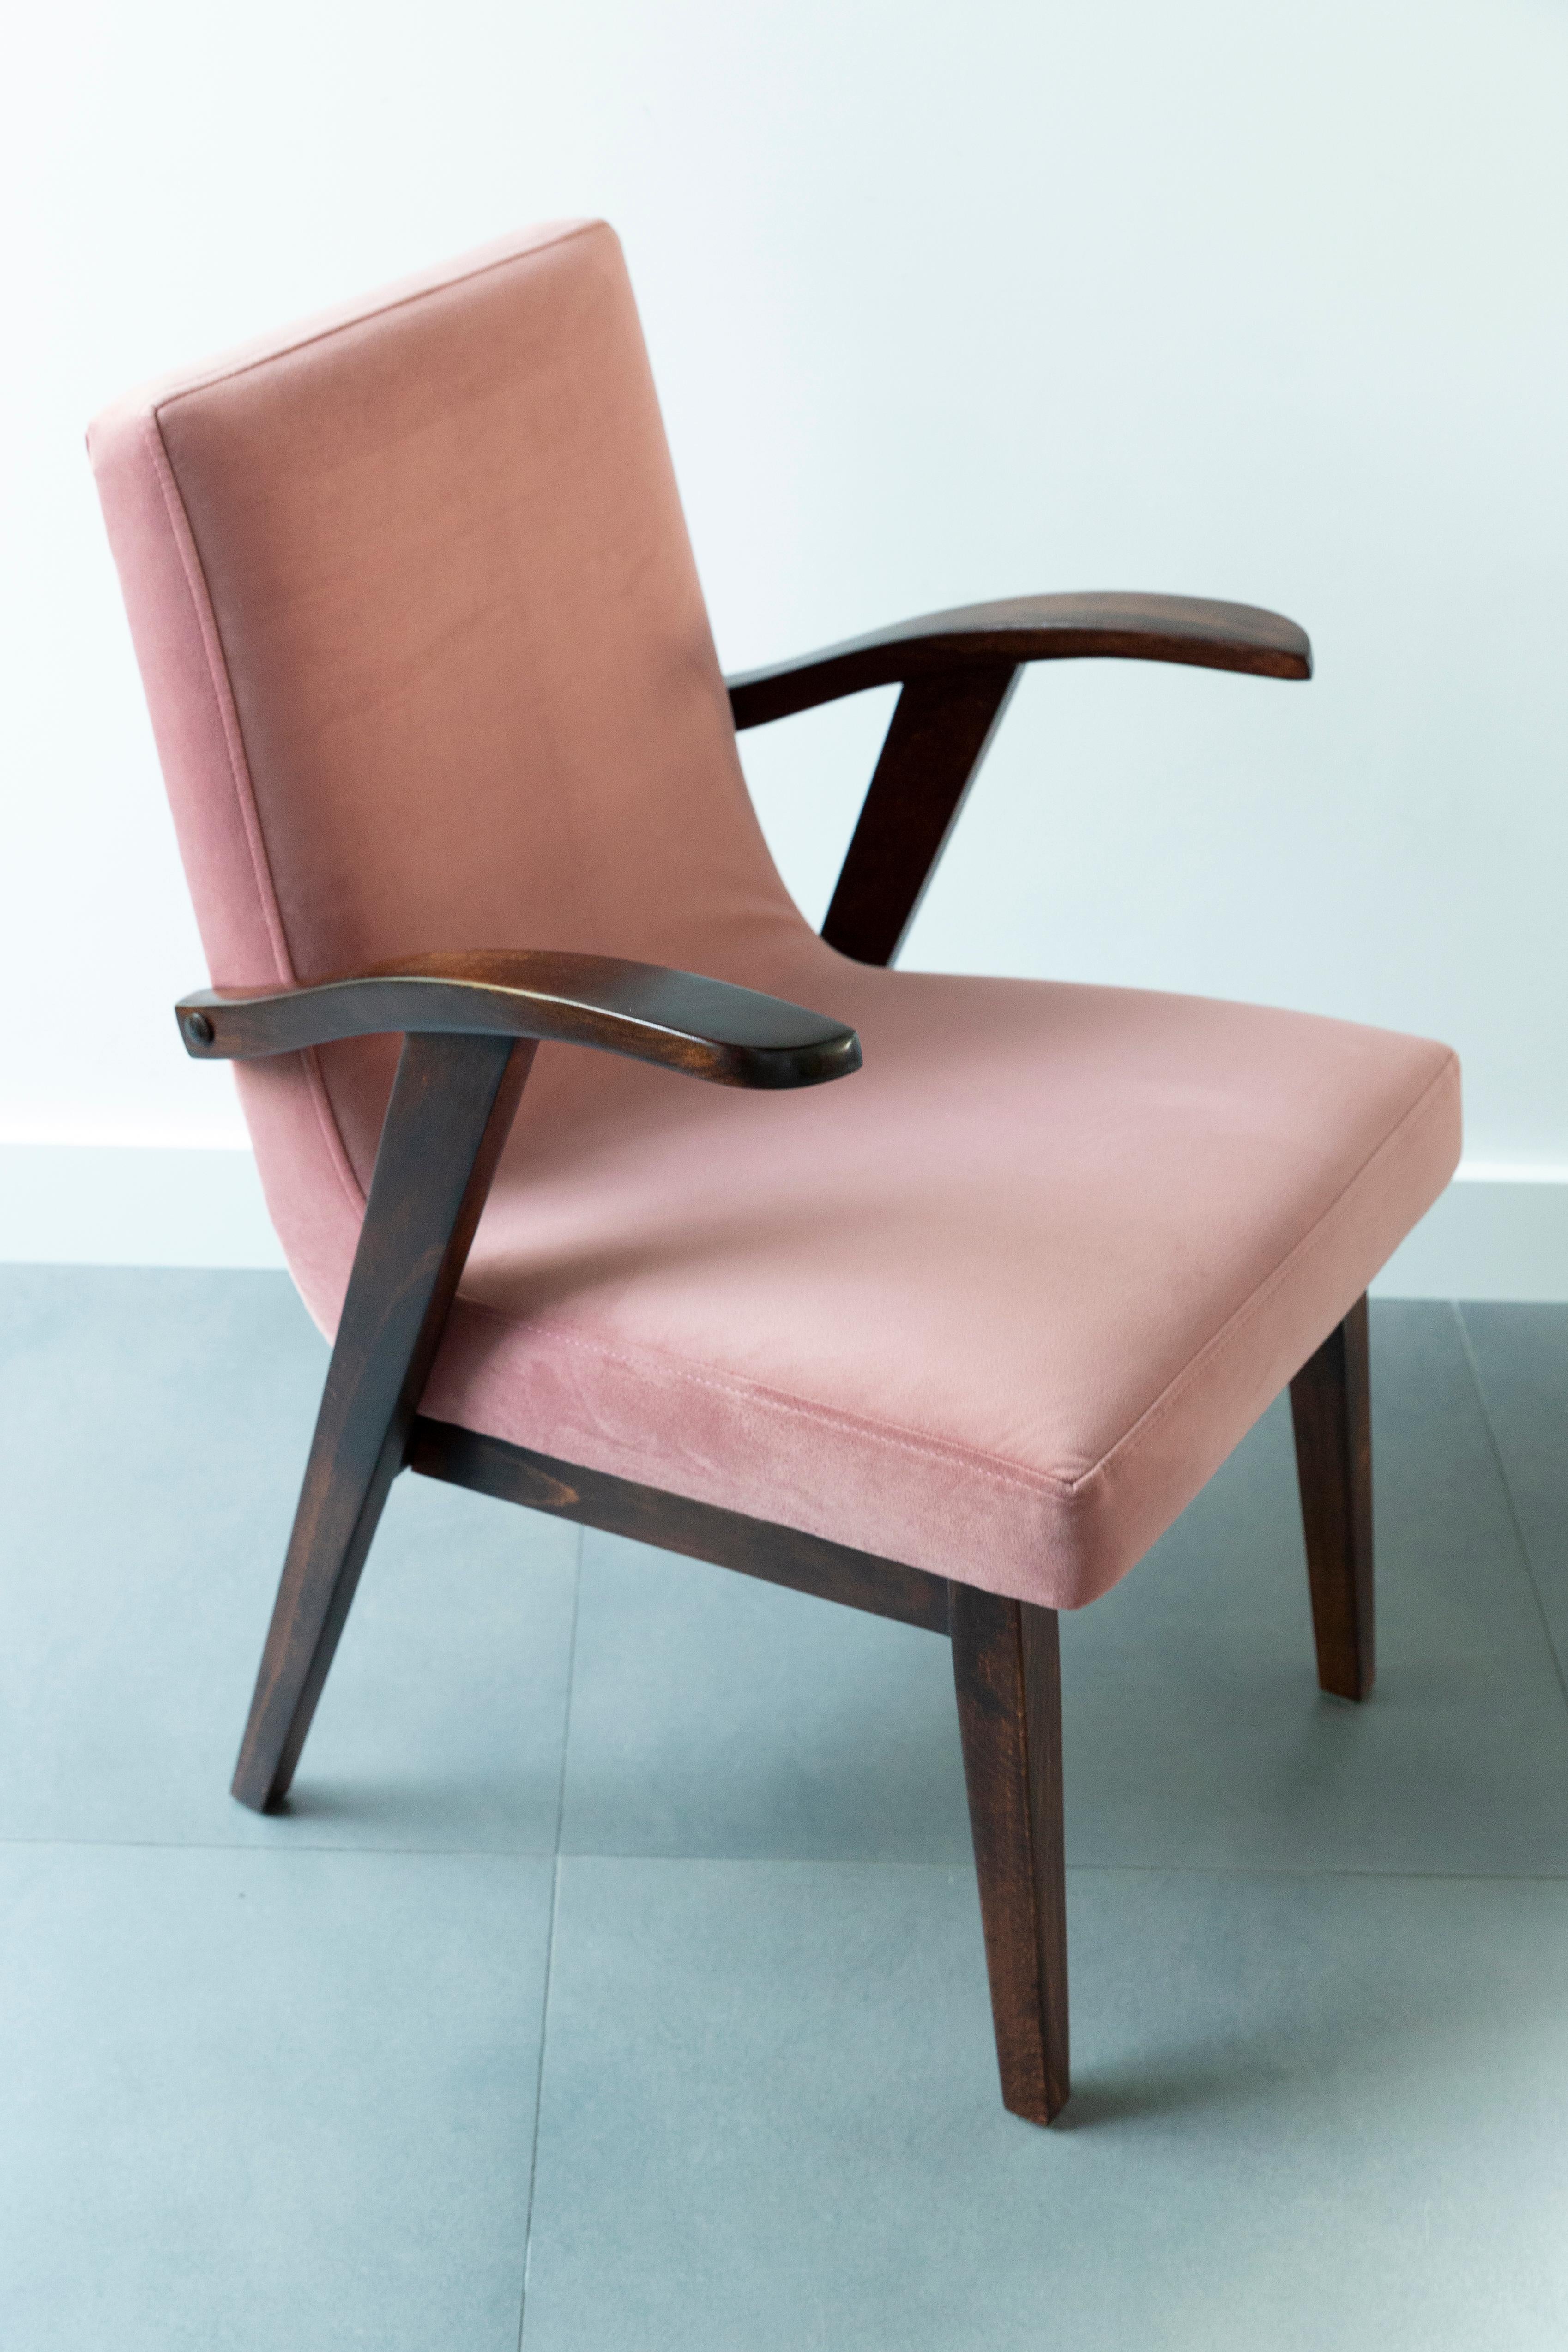 Textile Twelve 20th Century Armchairs in Dusty Pink Velvet by Mieczyslaw Puchala, 1960s For Sale